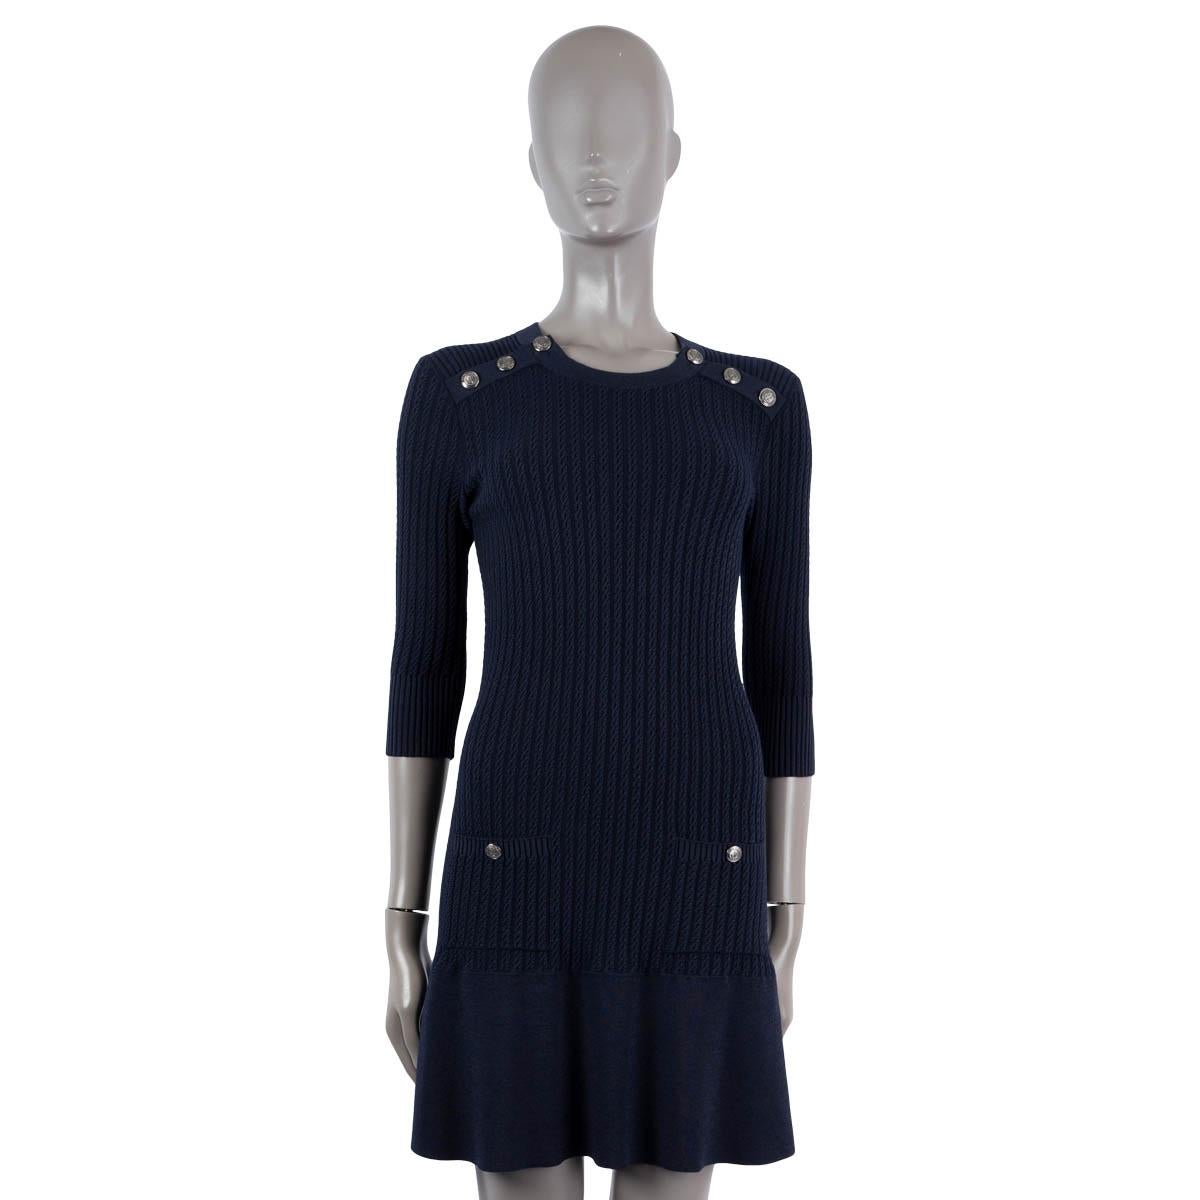 Black CHANEL navy blue cotton & wool 2018 18A HAMBURG BUTTONED NECK KNIT Dress 36 XS For Sale